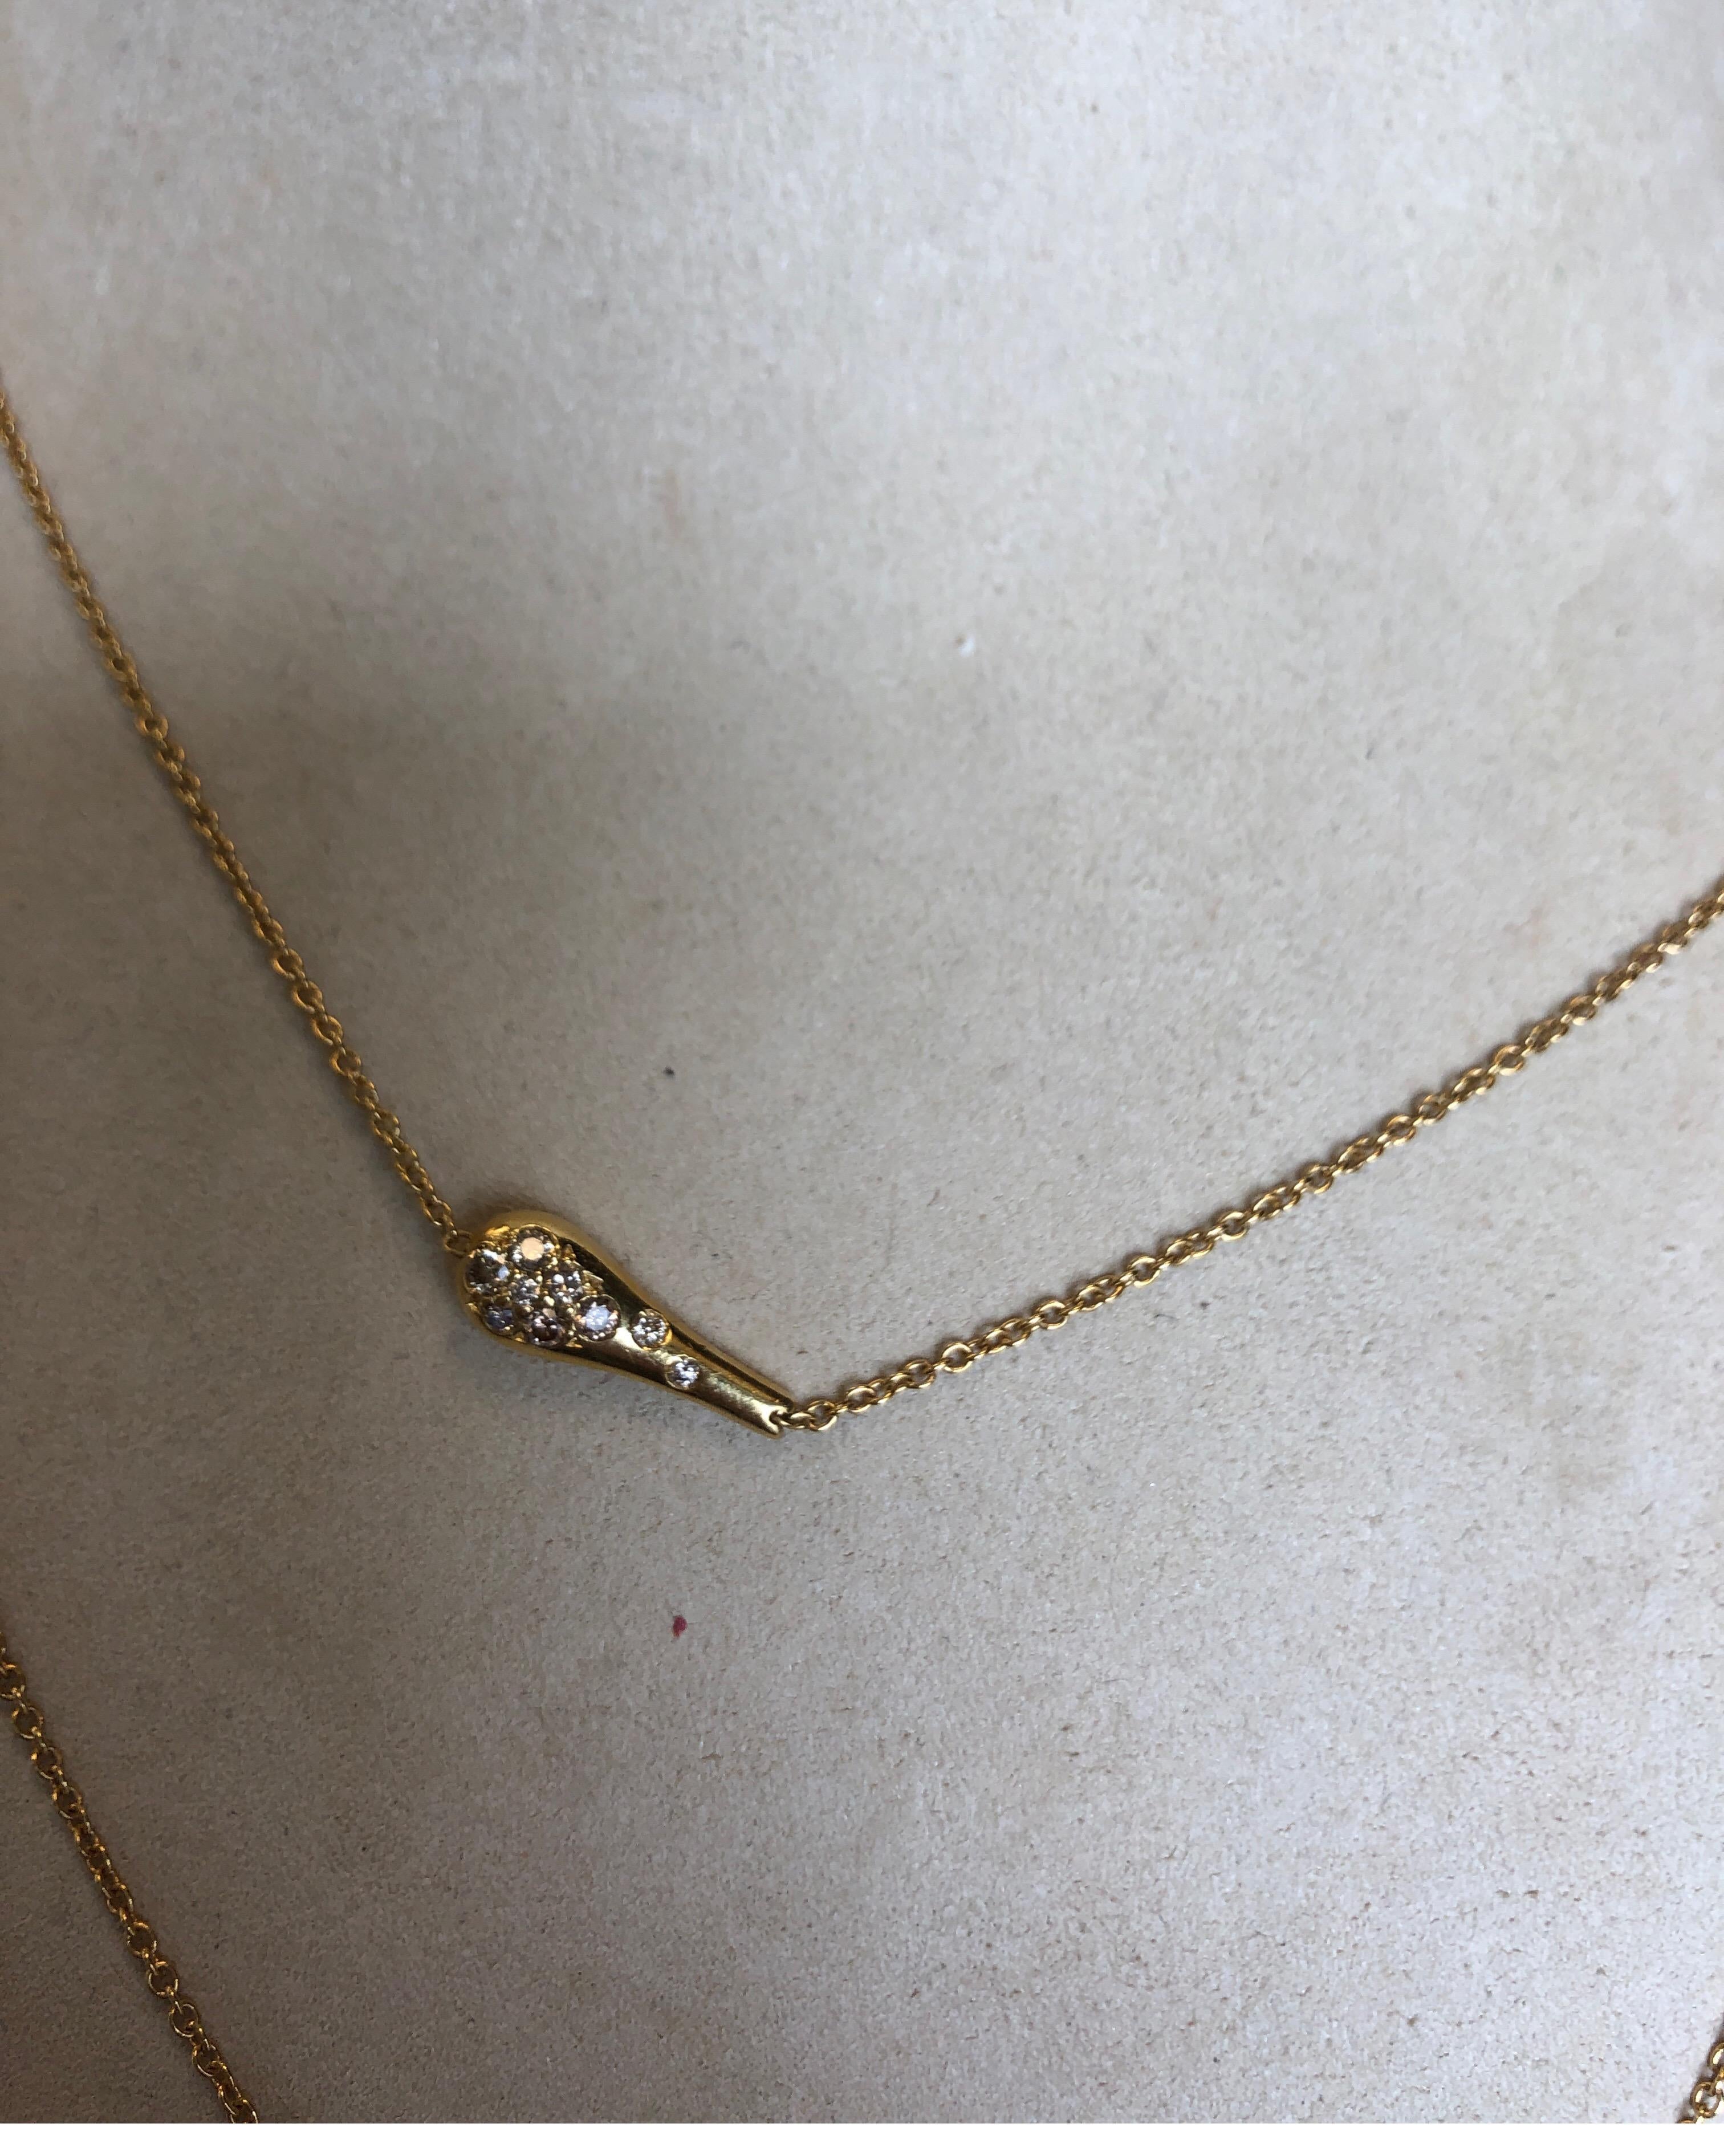 18K yellow gold neck chain with eight double sided tear drop shape elements with round cognac diamonds weighing 1.40cts total
Last retail $6500